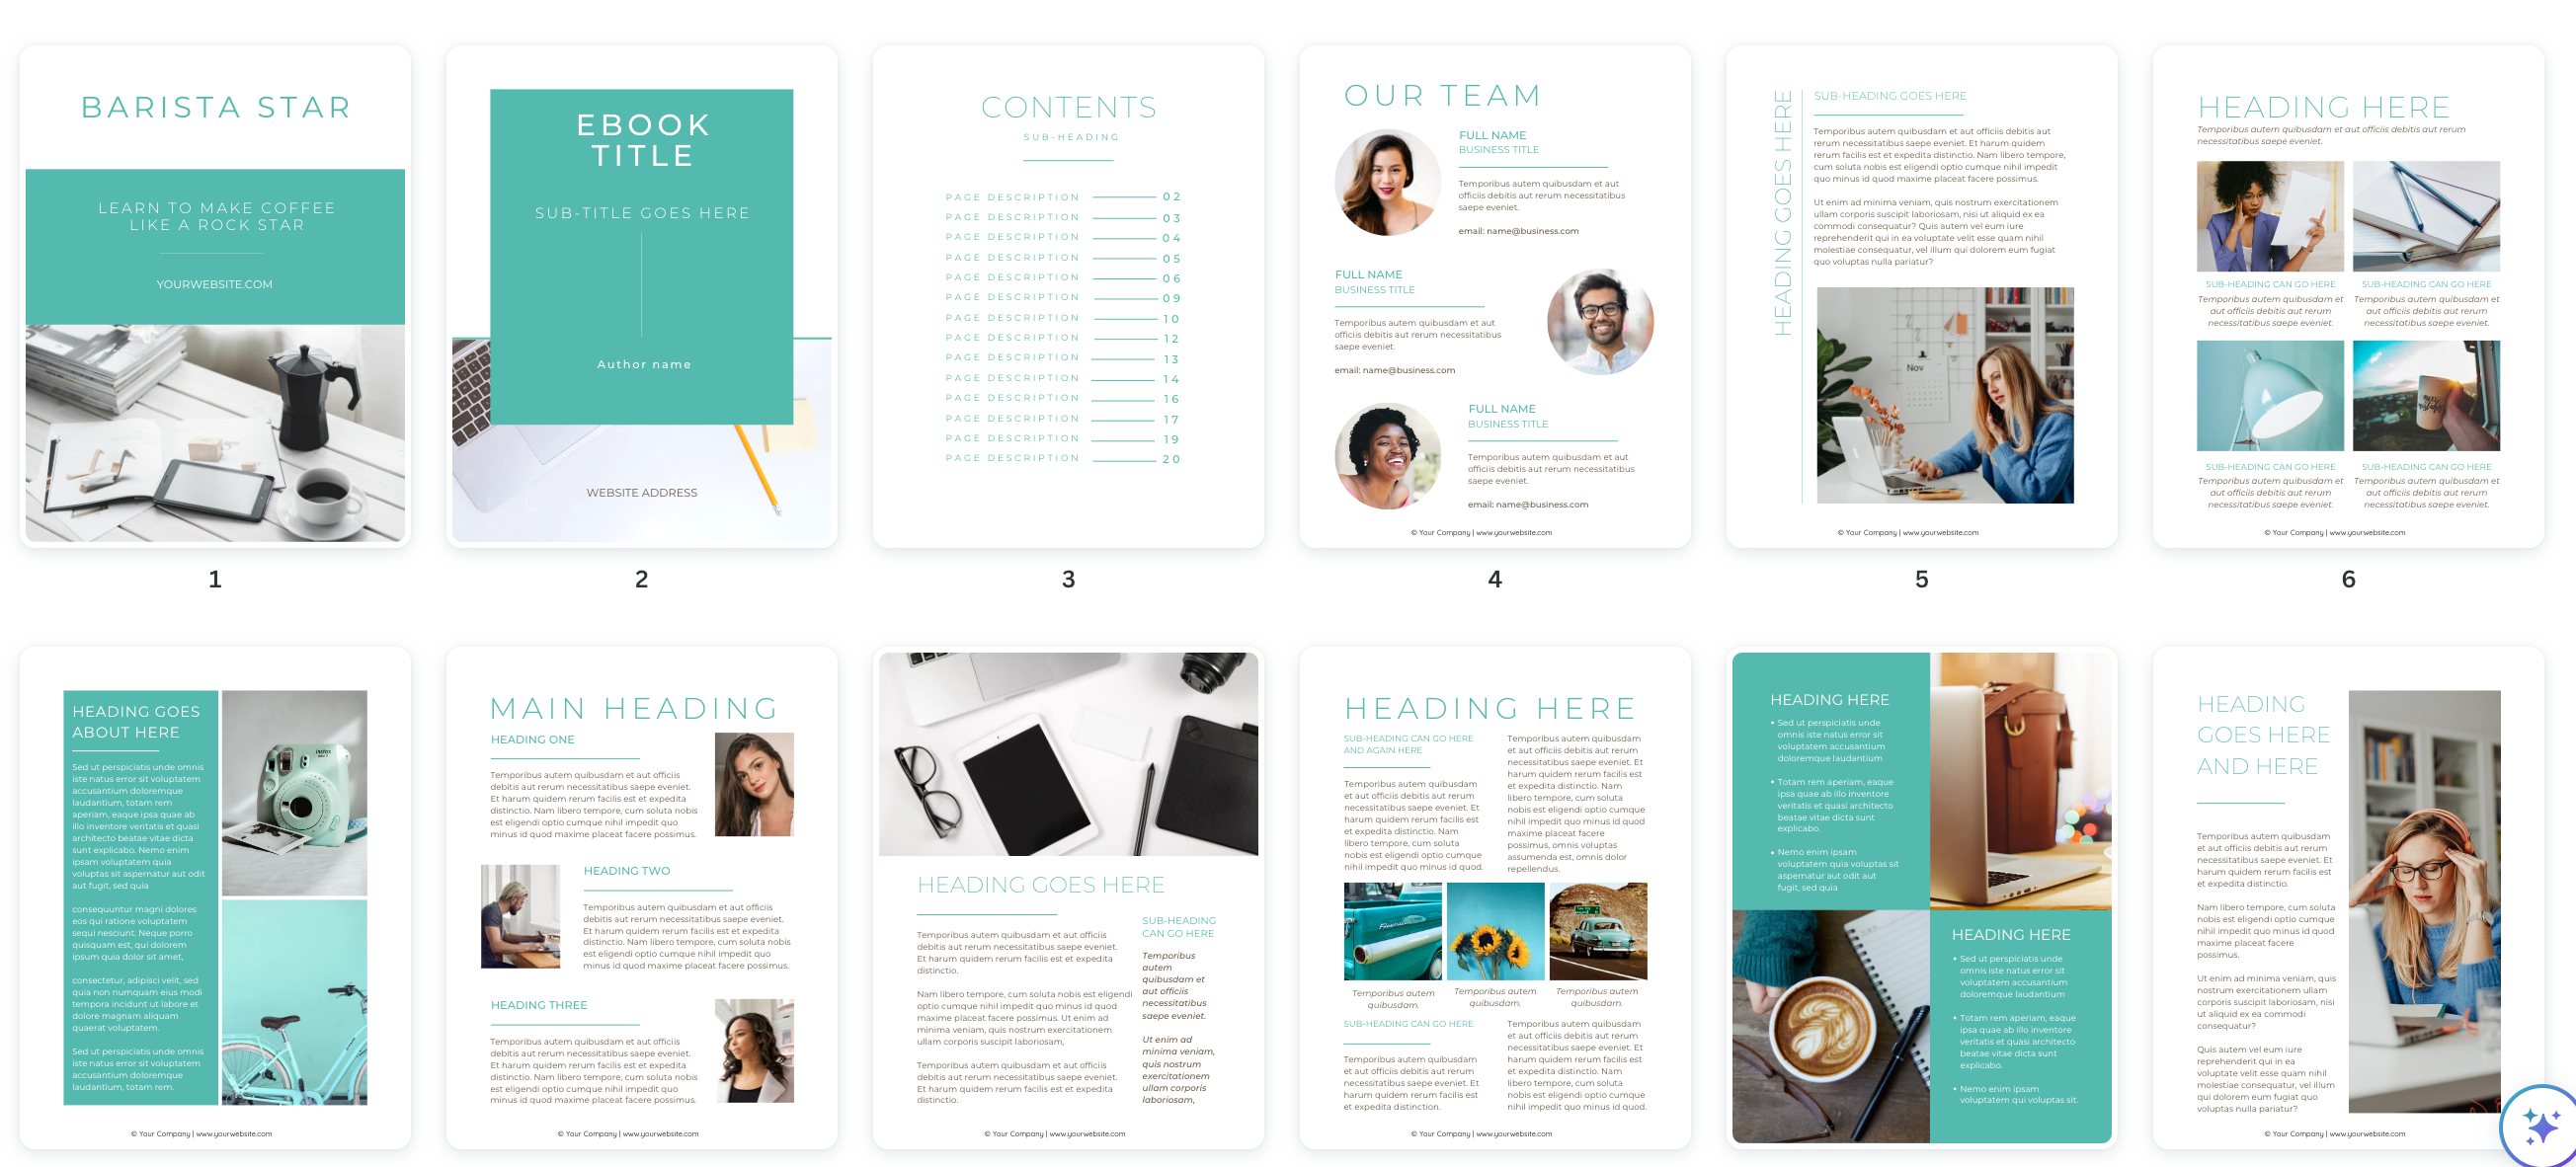 Digital products that scale ebook template mockup